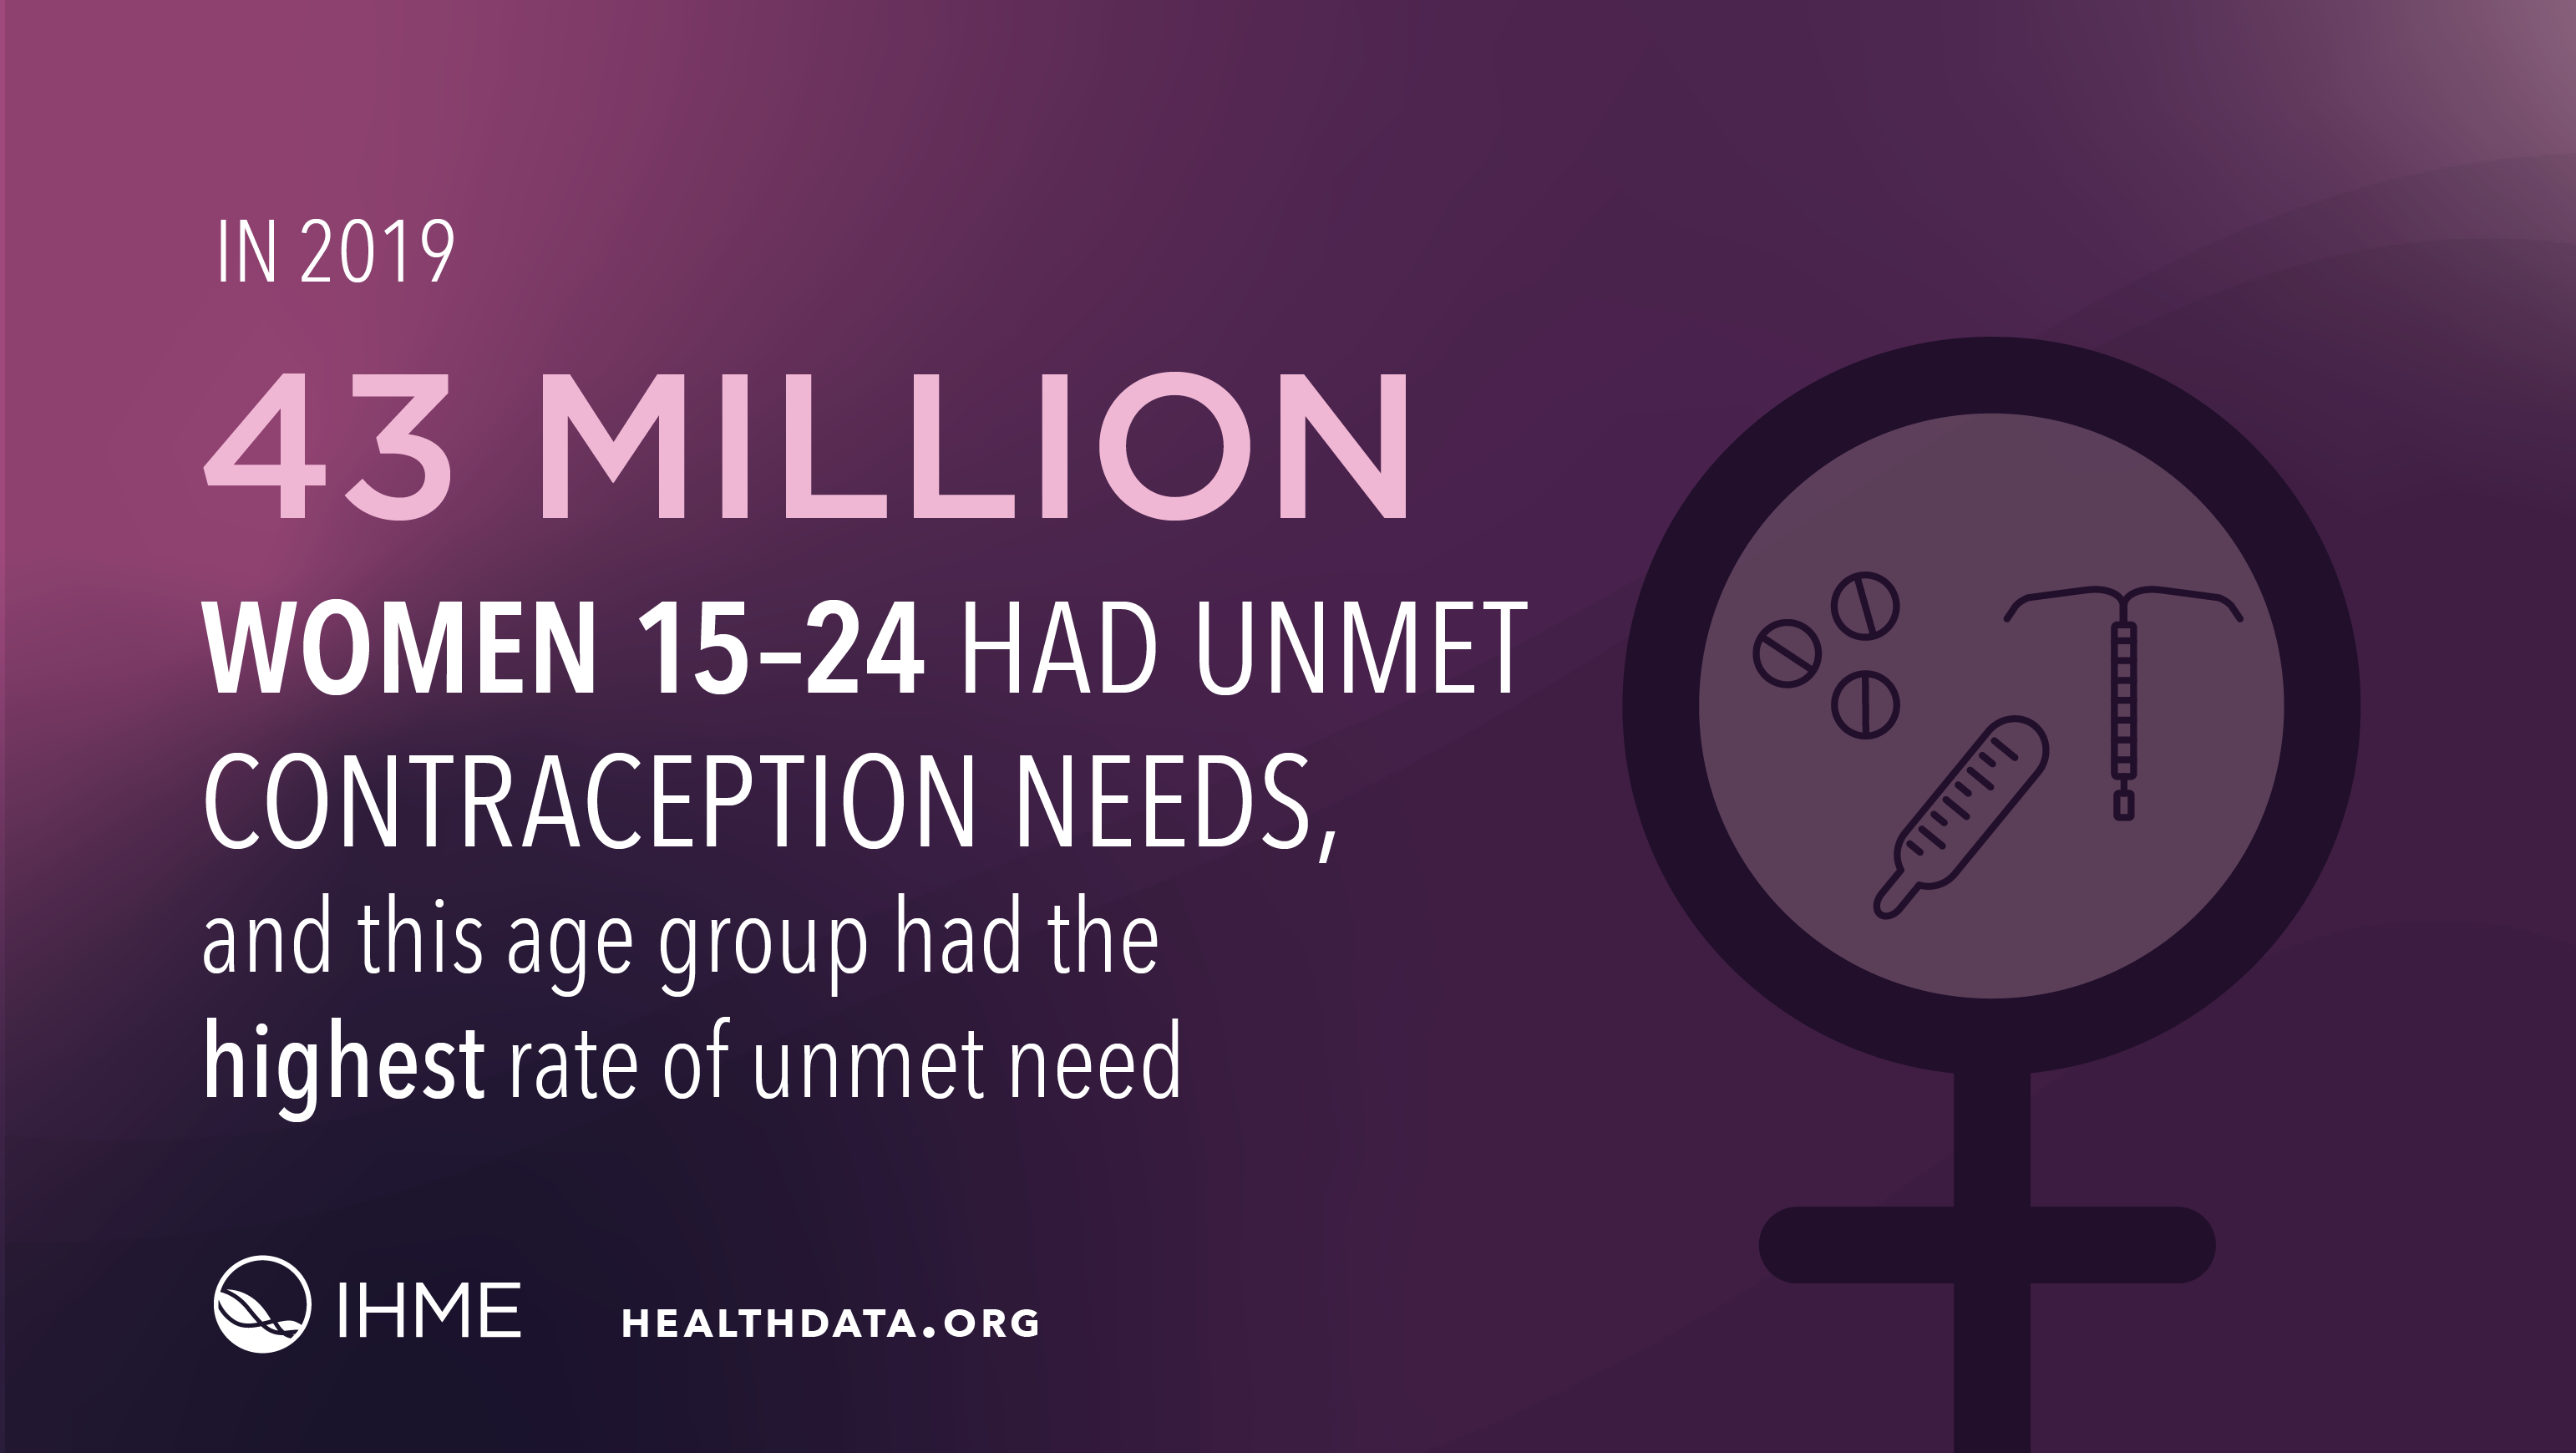 In 2019, 43 million women 15-24 had unmet contraception needs, and this age group had the highest rate of unmet need